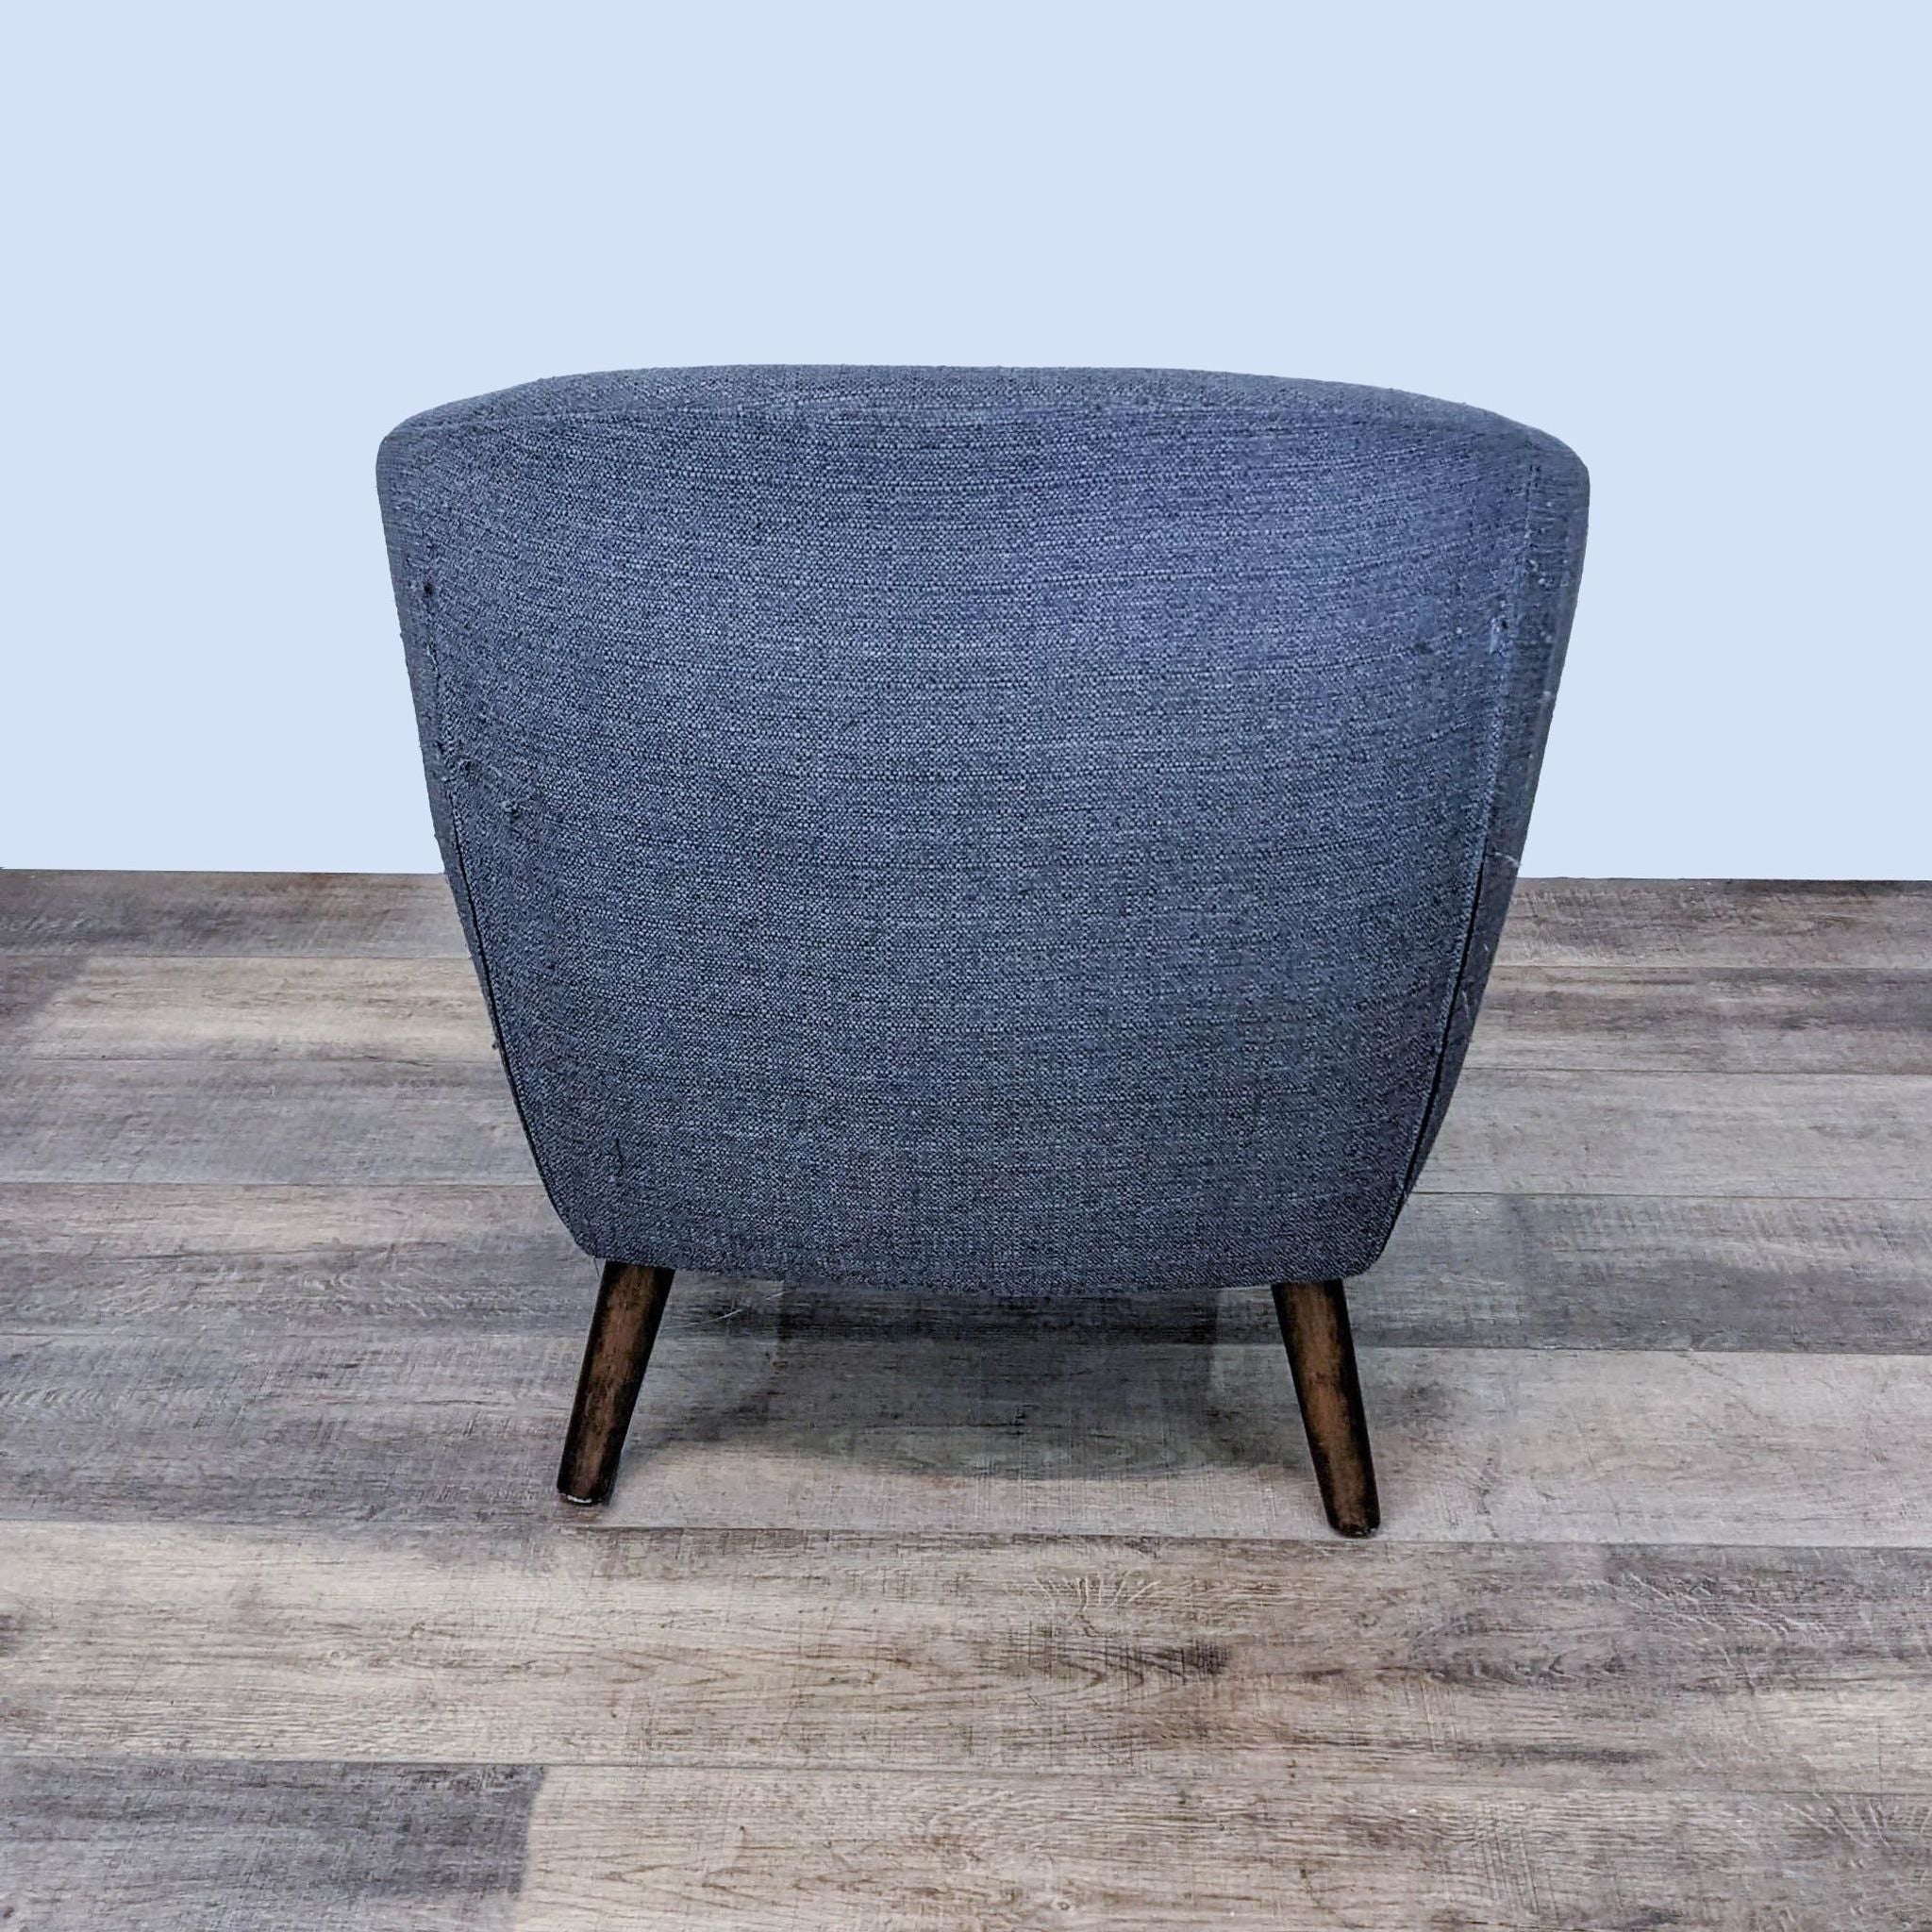 Rear view of a Reperch-brand mid-century style upholstered chair with tapered legs on a wood floor.